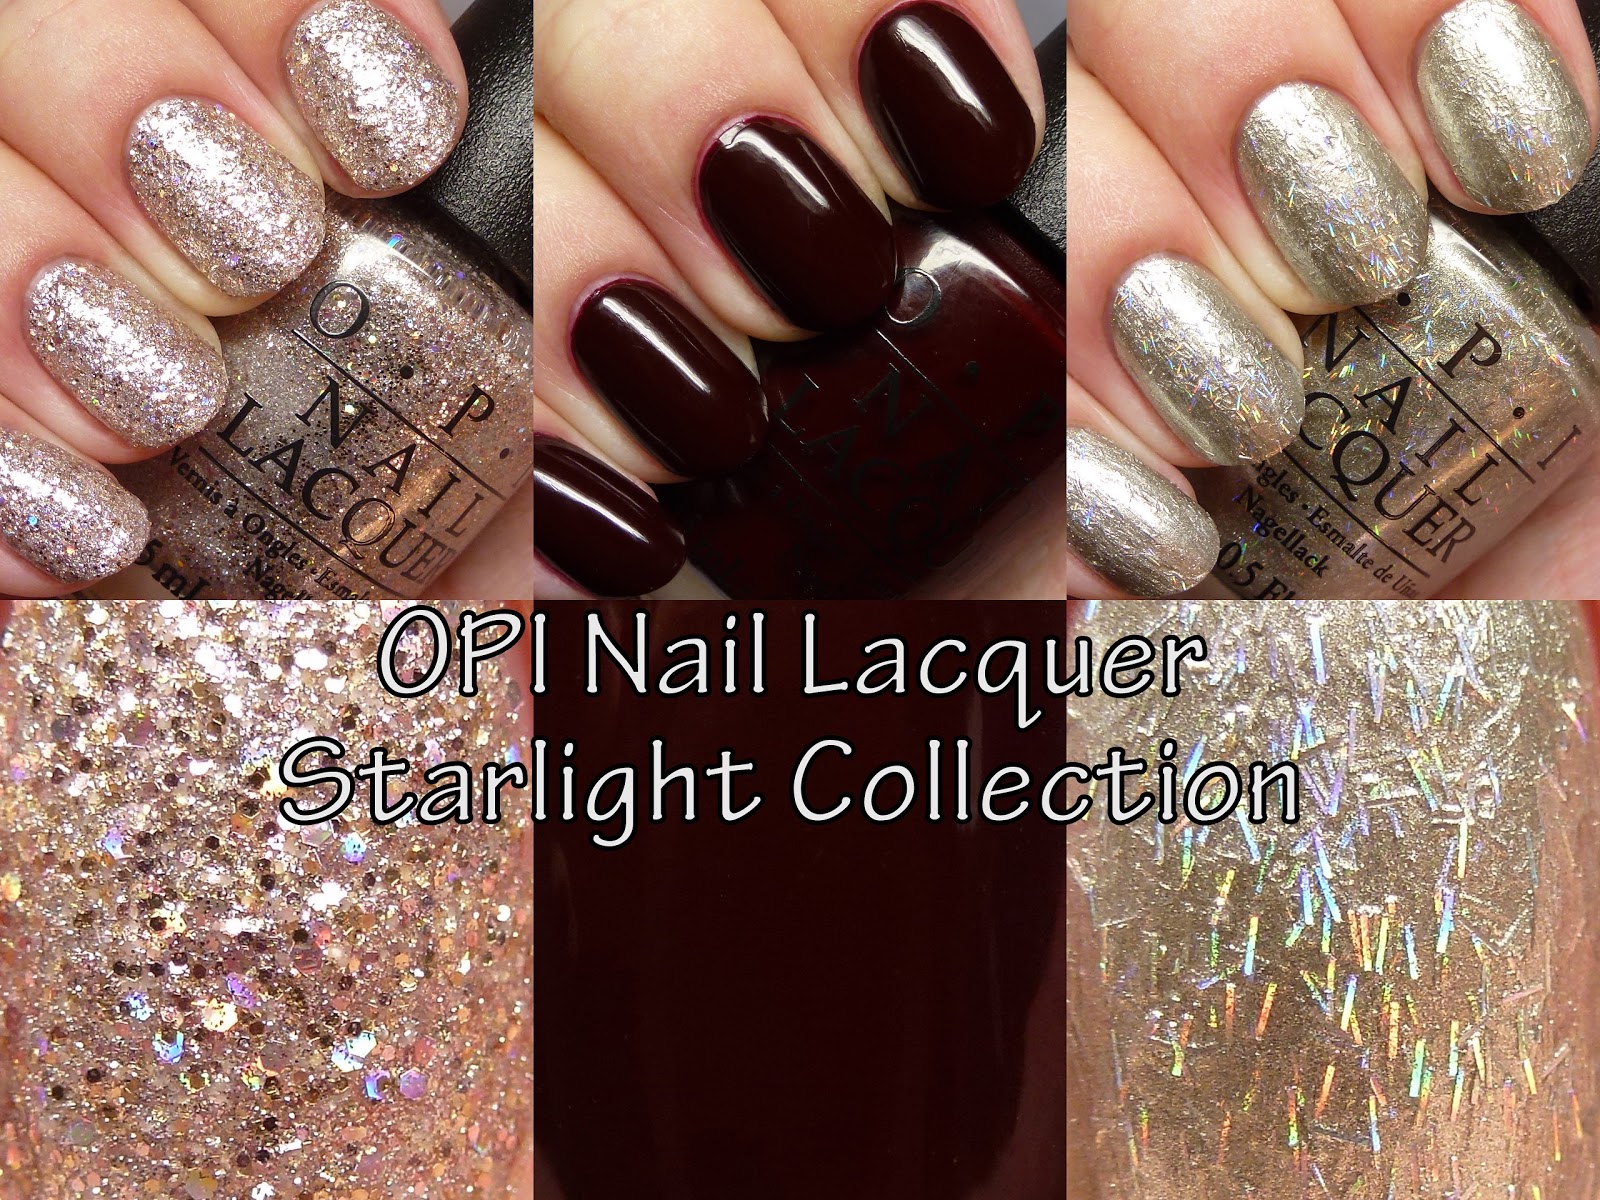 OPI This Gown Needs A Crown Nail Polish Mss Universe Collection | eBay